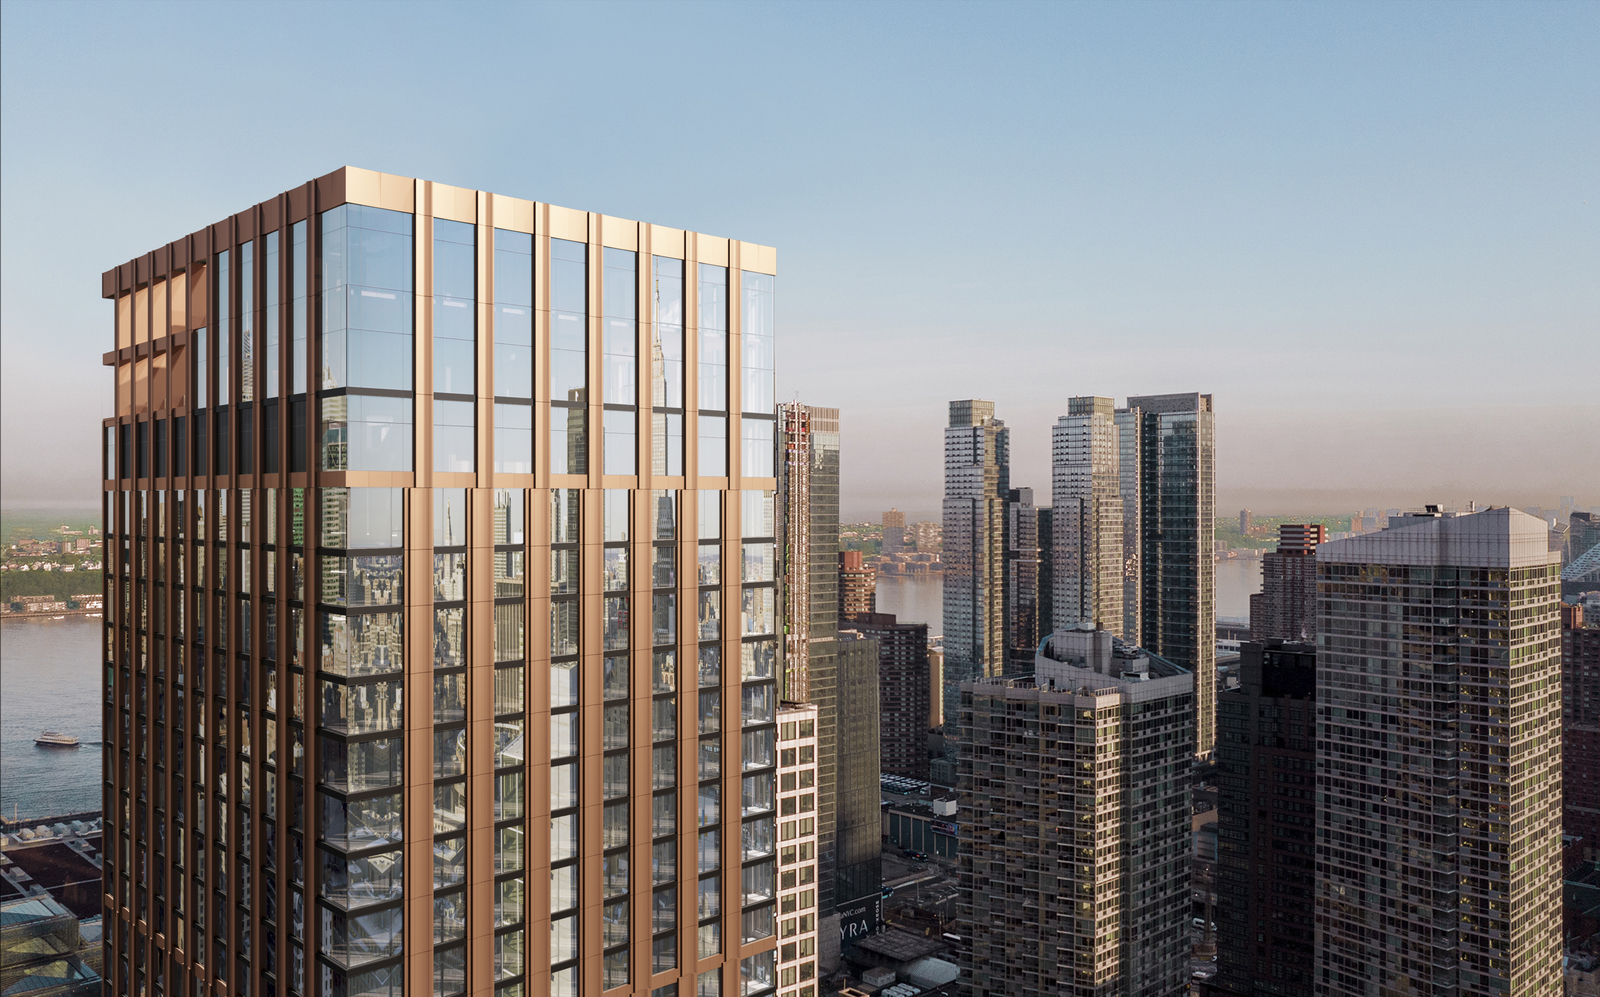 Related Companies Opens Hotel-Inspired 270-Unit The Set Luxury Apartment Community Located in New York’s Hudson Yards